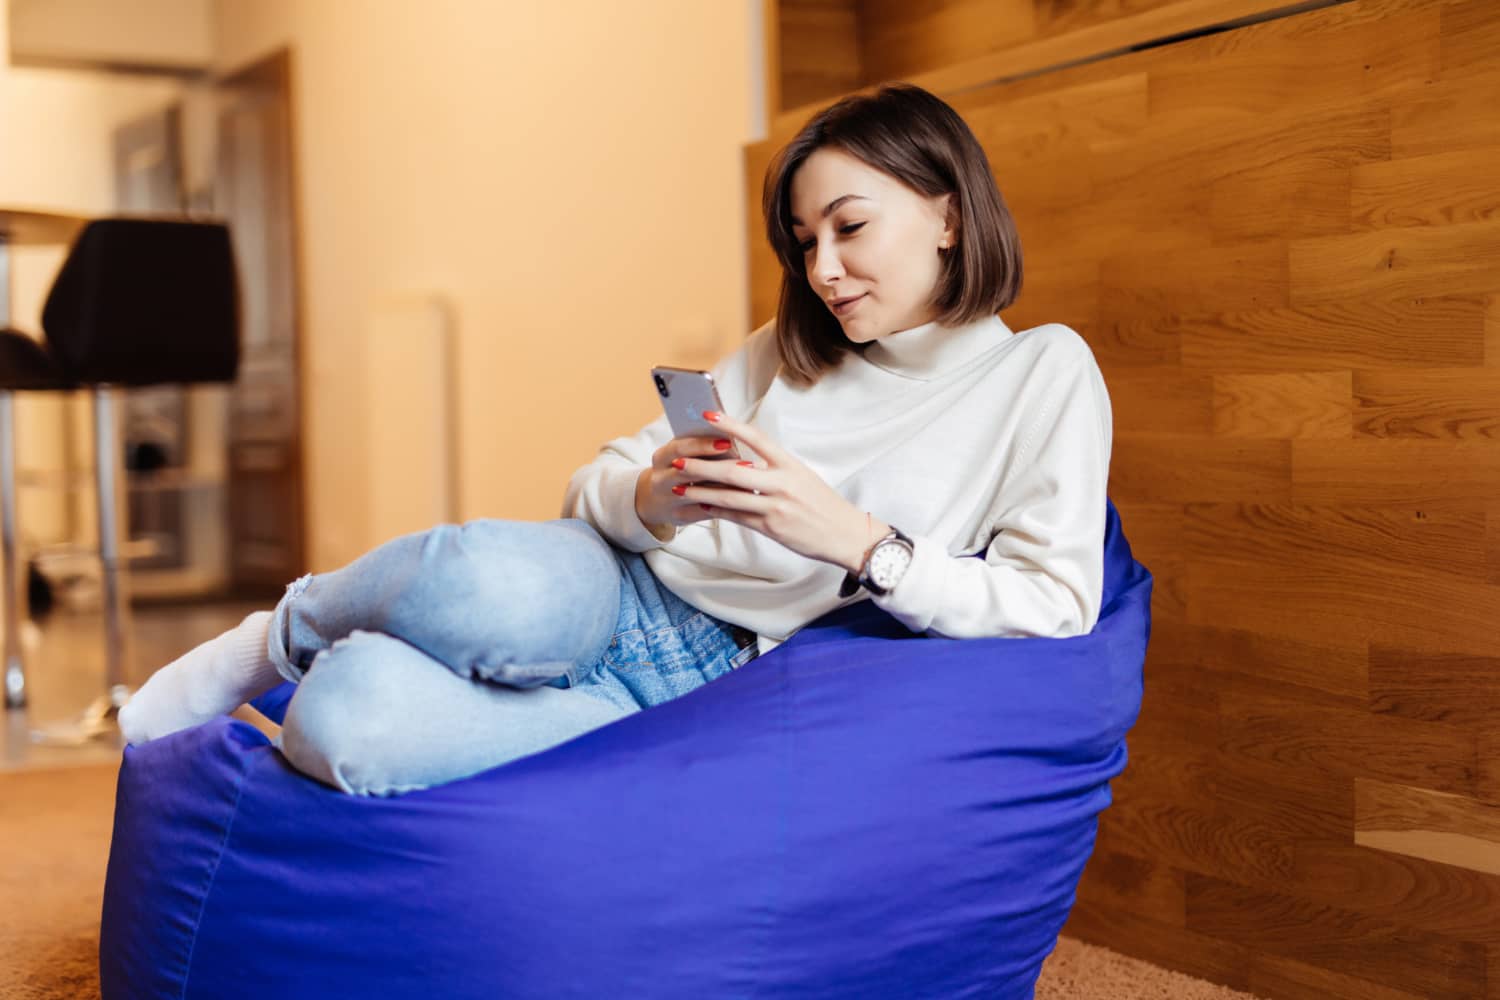 smiling woman is sitting bright violet bag chair using her phone texting with her friends